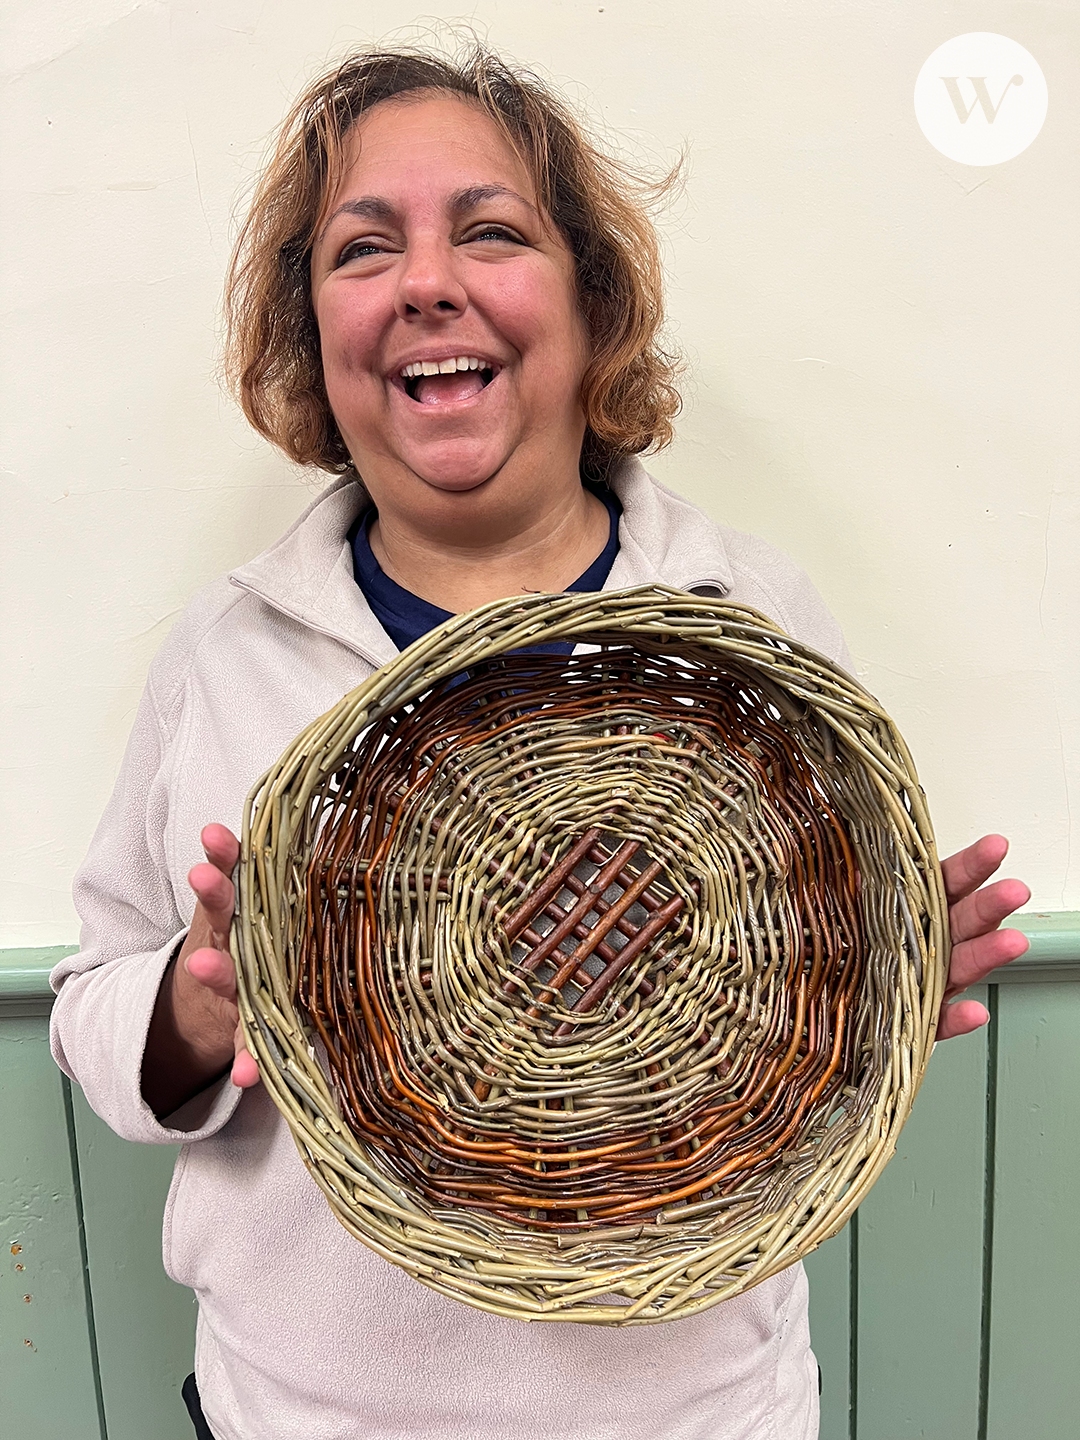 A photograph of one of our class participants showing the bowl she created. She's smiling and seems very pleased with the results.